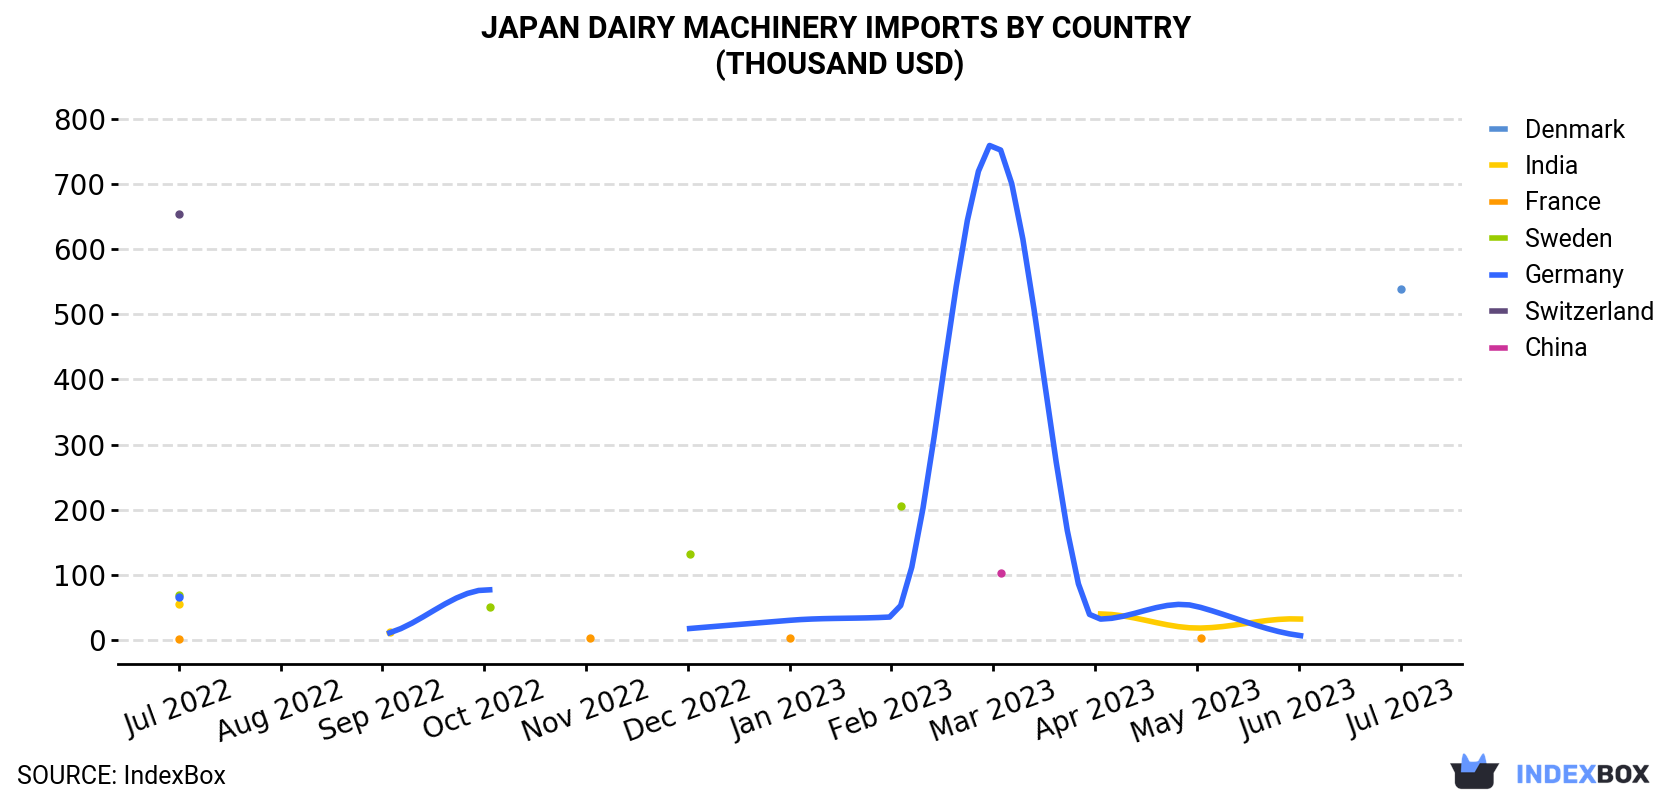 Japan Dairy Machinery Imports By Country (Thousand USD)